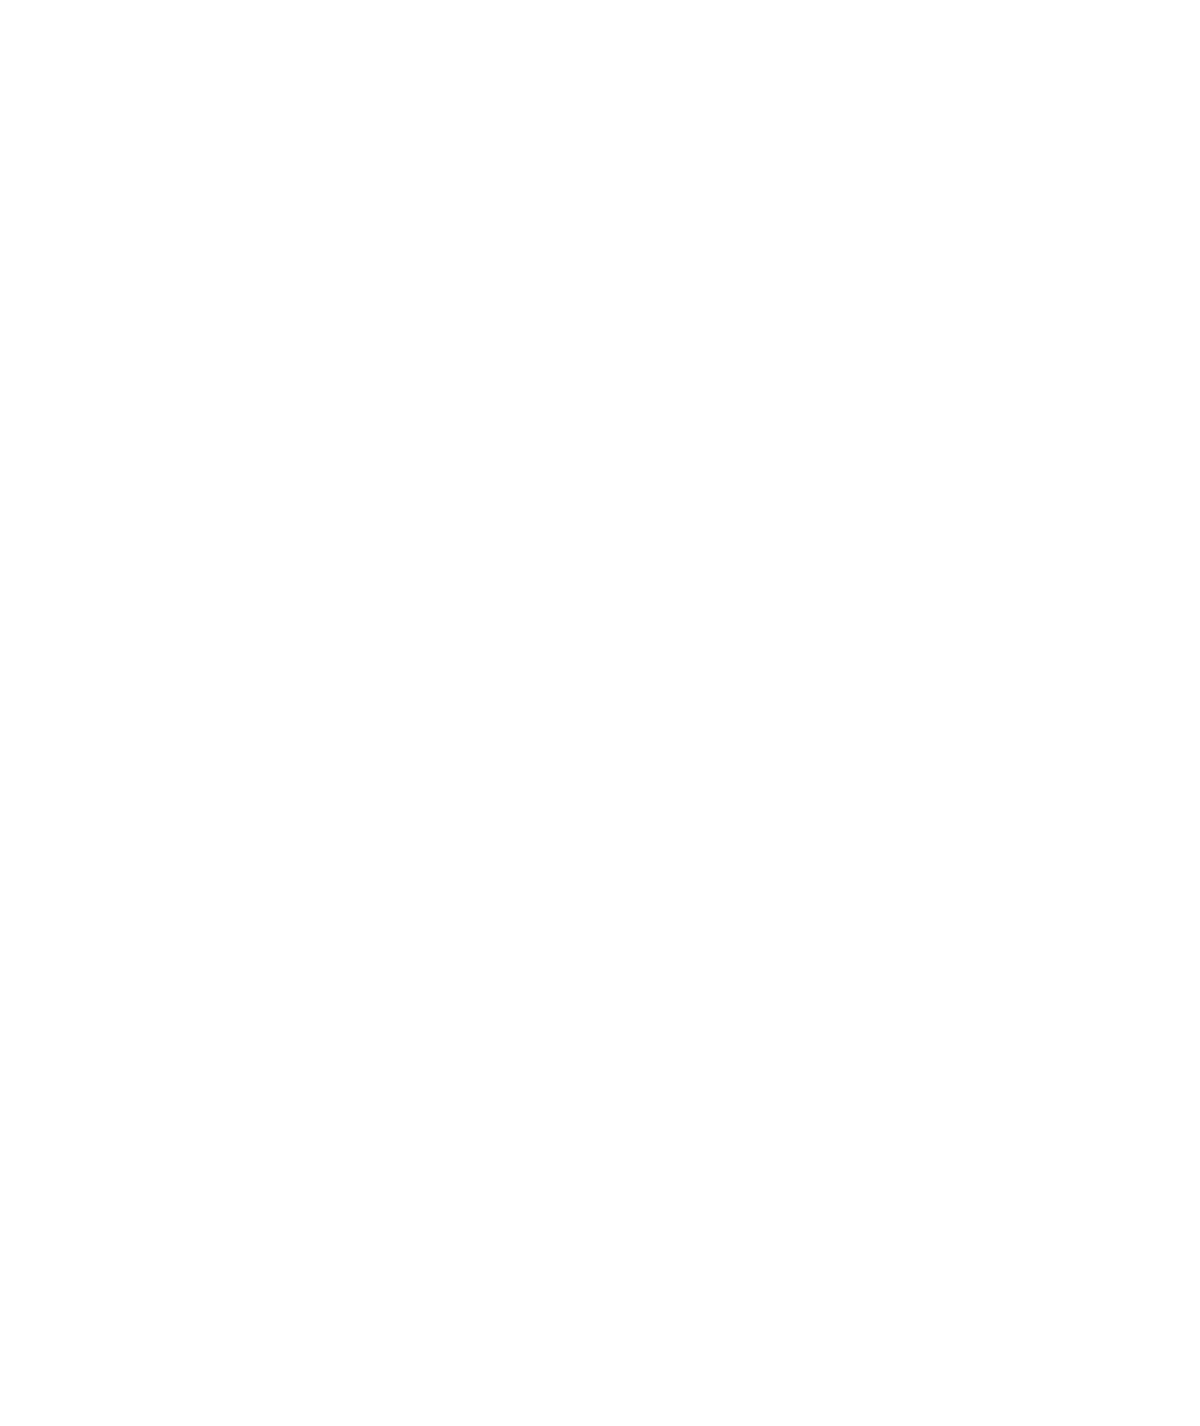 GRAND FINALE STANDING LIVE TOUR 16 DOGMA -ANOTHER FATE-